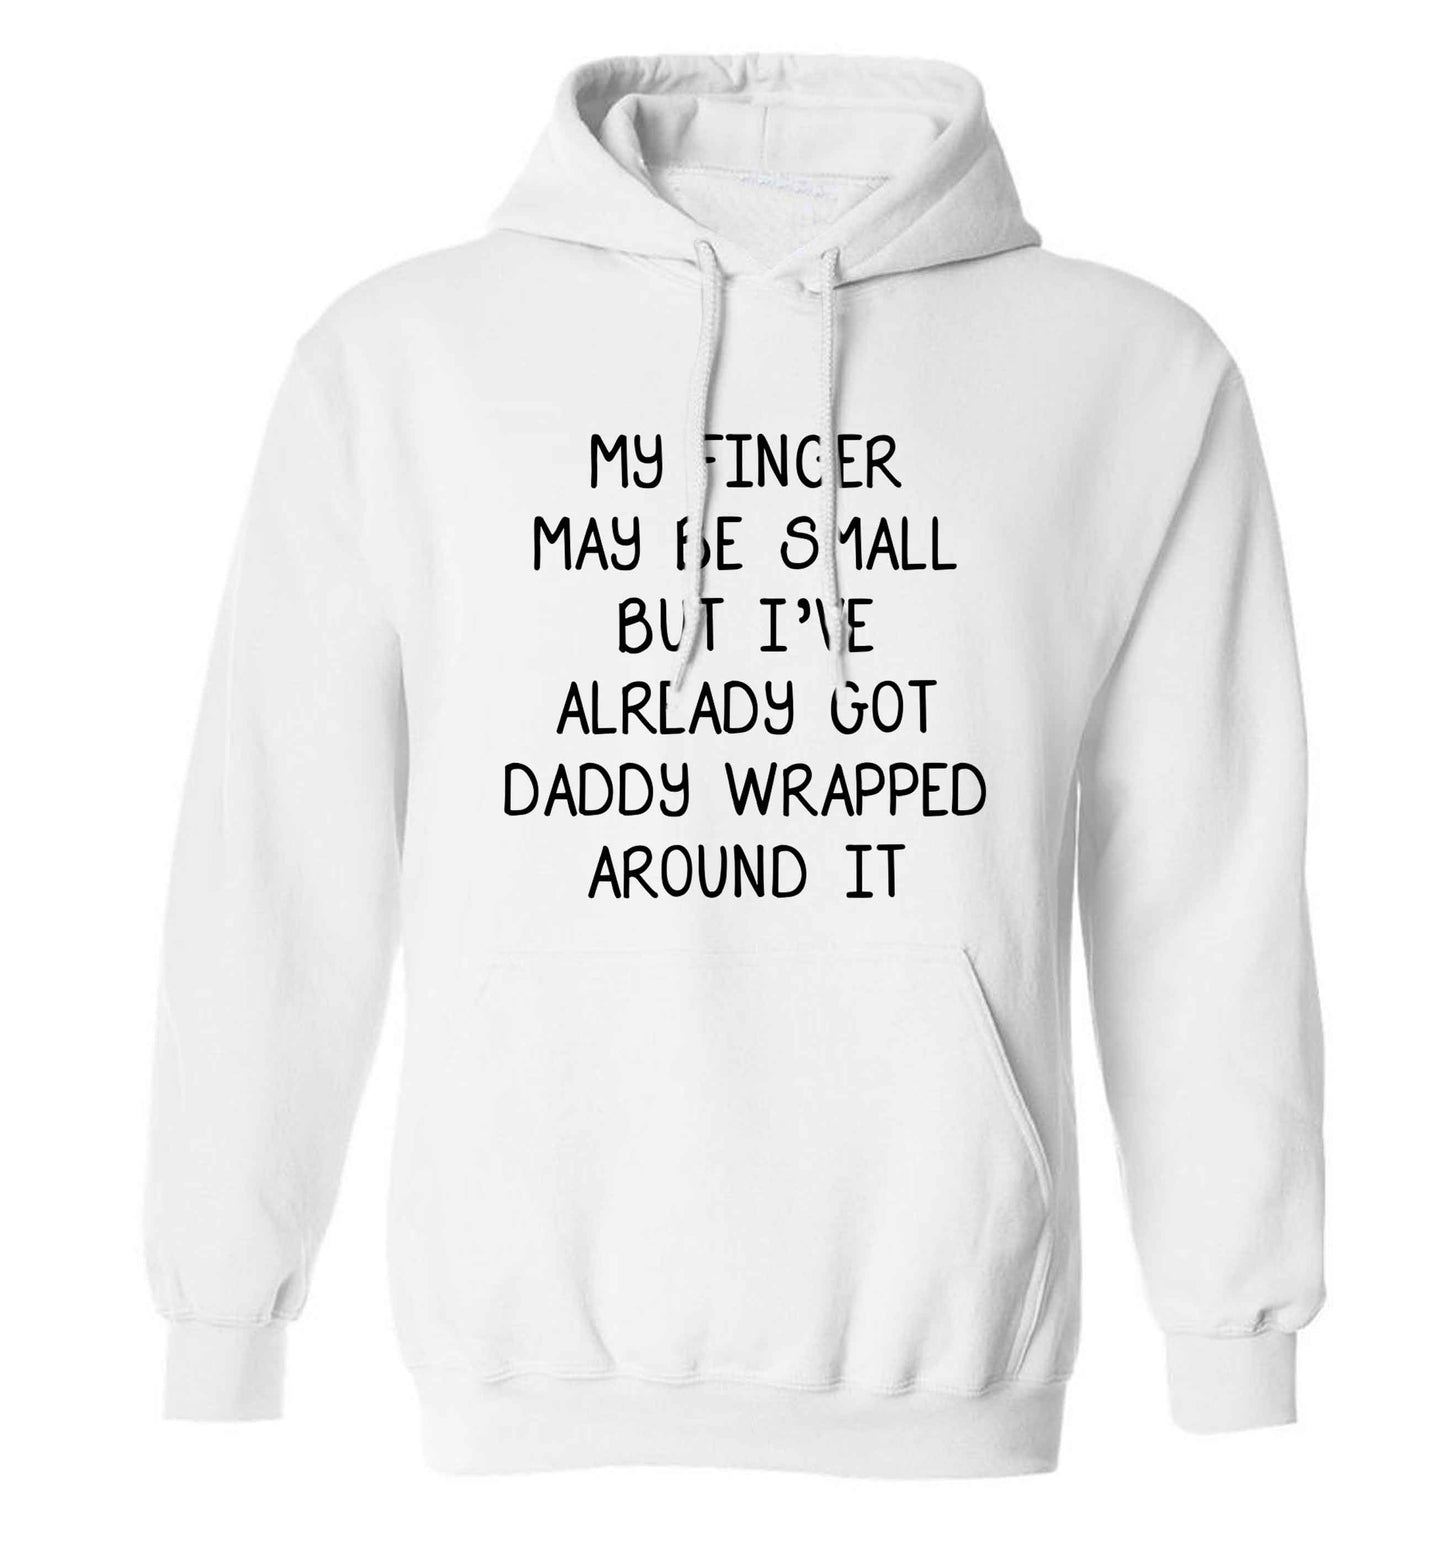 My finger may be small but I've already got daddy wrapped around it adults unisex white hoodie 2XL